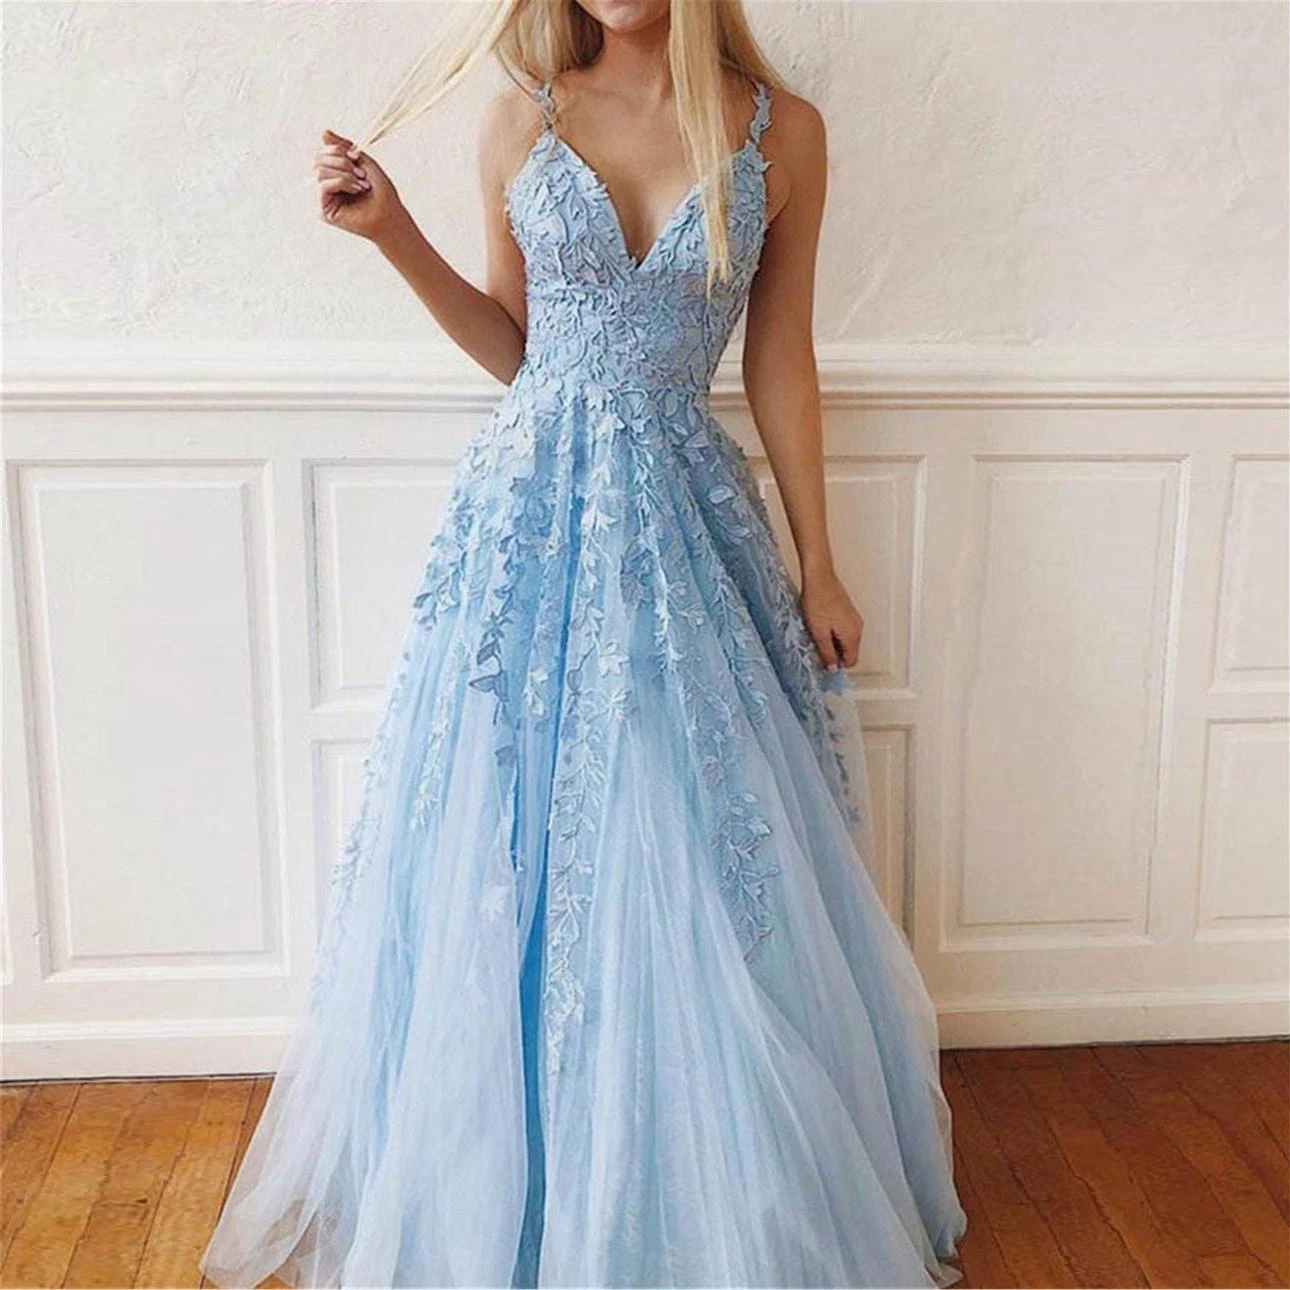 Light Blue Pretty Homecoming Dresses V-Neck Sleeveless Tulle A-line Lace Appliques Women Formal Long Evening Prom Elegant Gowns